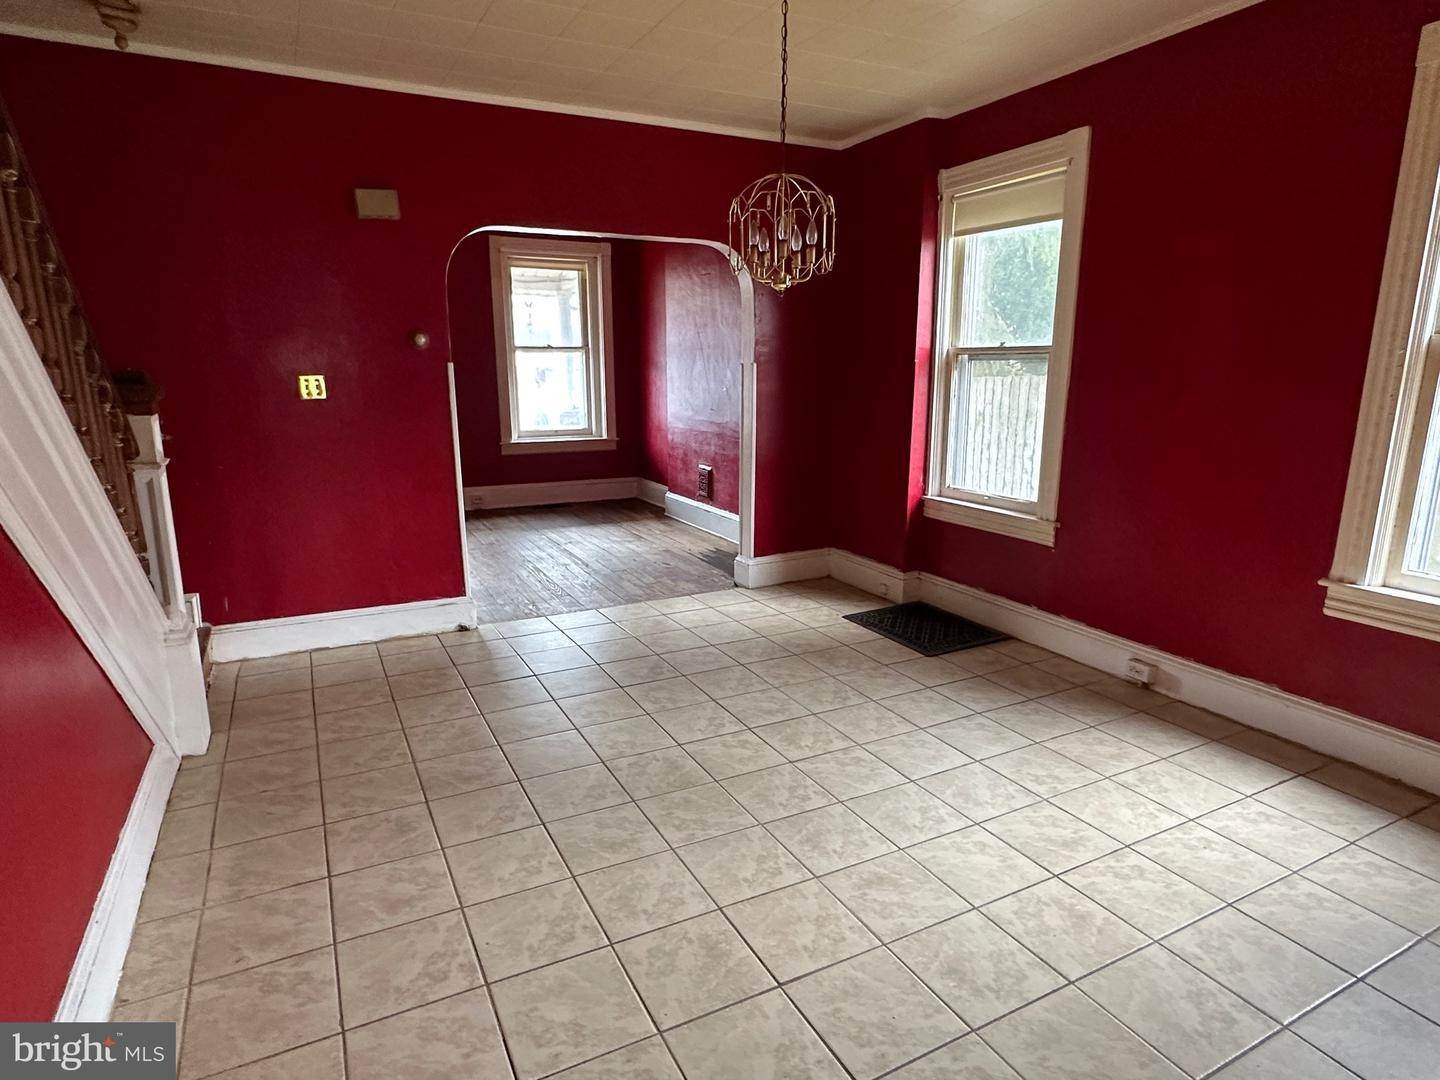 6. Residential for Sale at 902 EDGEWOOD Avenue Lancaster, Pennsylvania 17603 United States